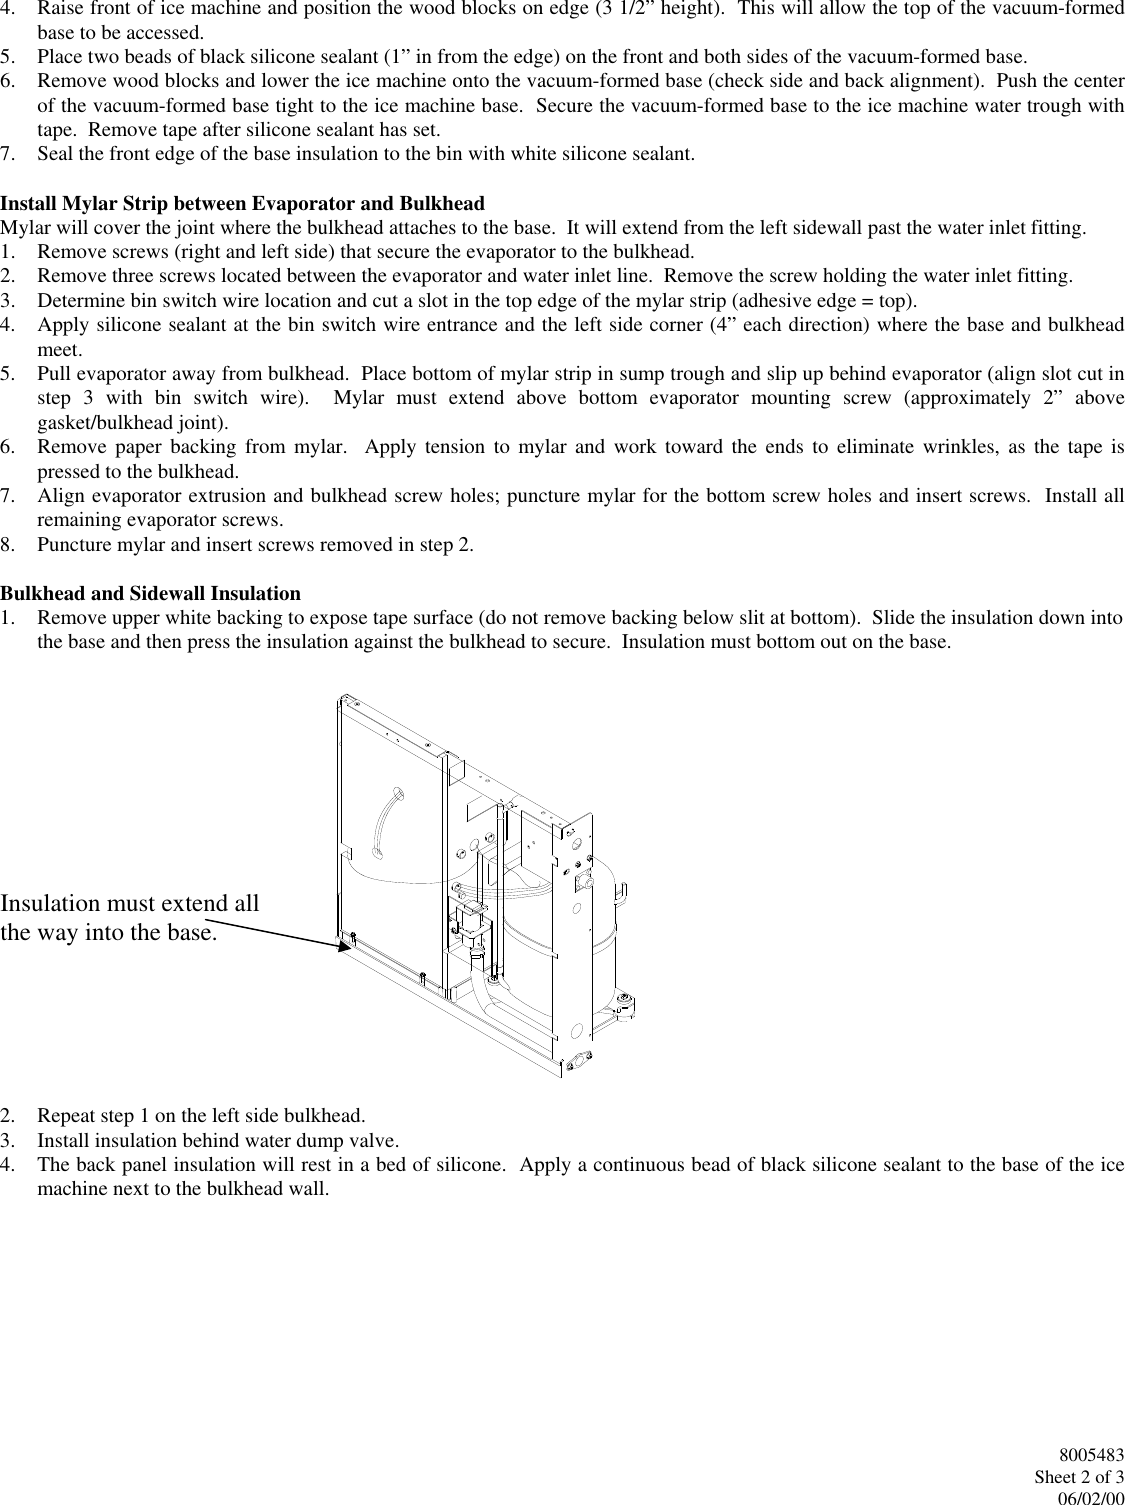 Page 2 of 3 - Manitowoc-Ice Manitowoc-Ice-Q-1300-Users-Manual-  Manitowoc-ice-q-1300-users-manual